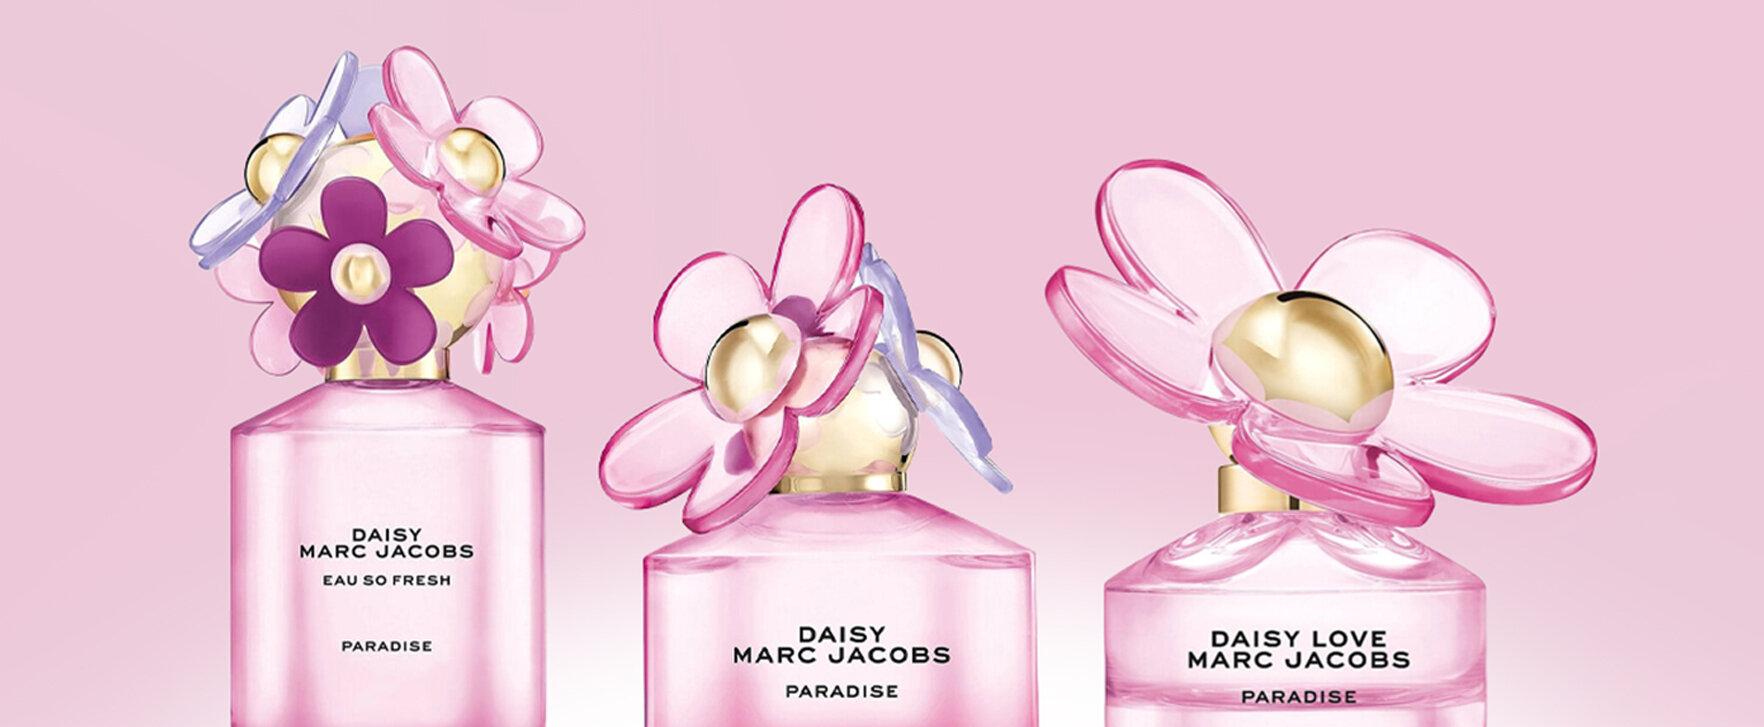 Marc Jacobs Presents New Limited “Daisy Paradise” Edition